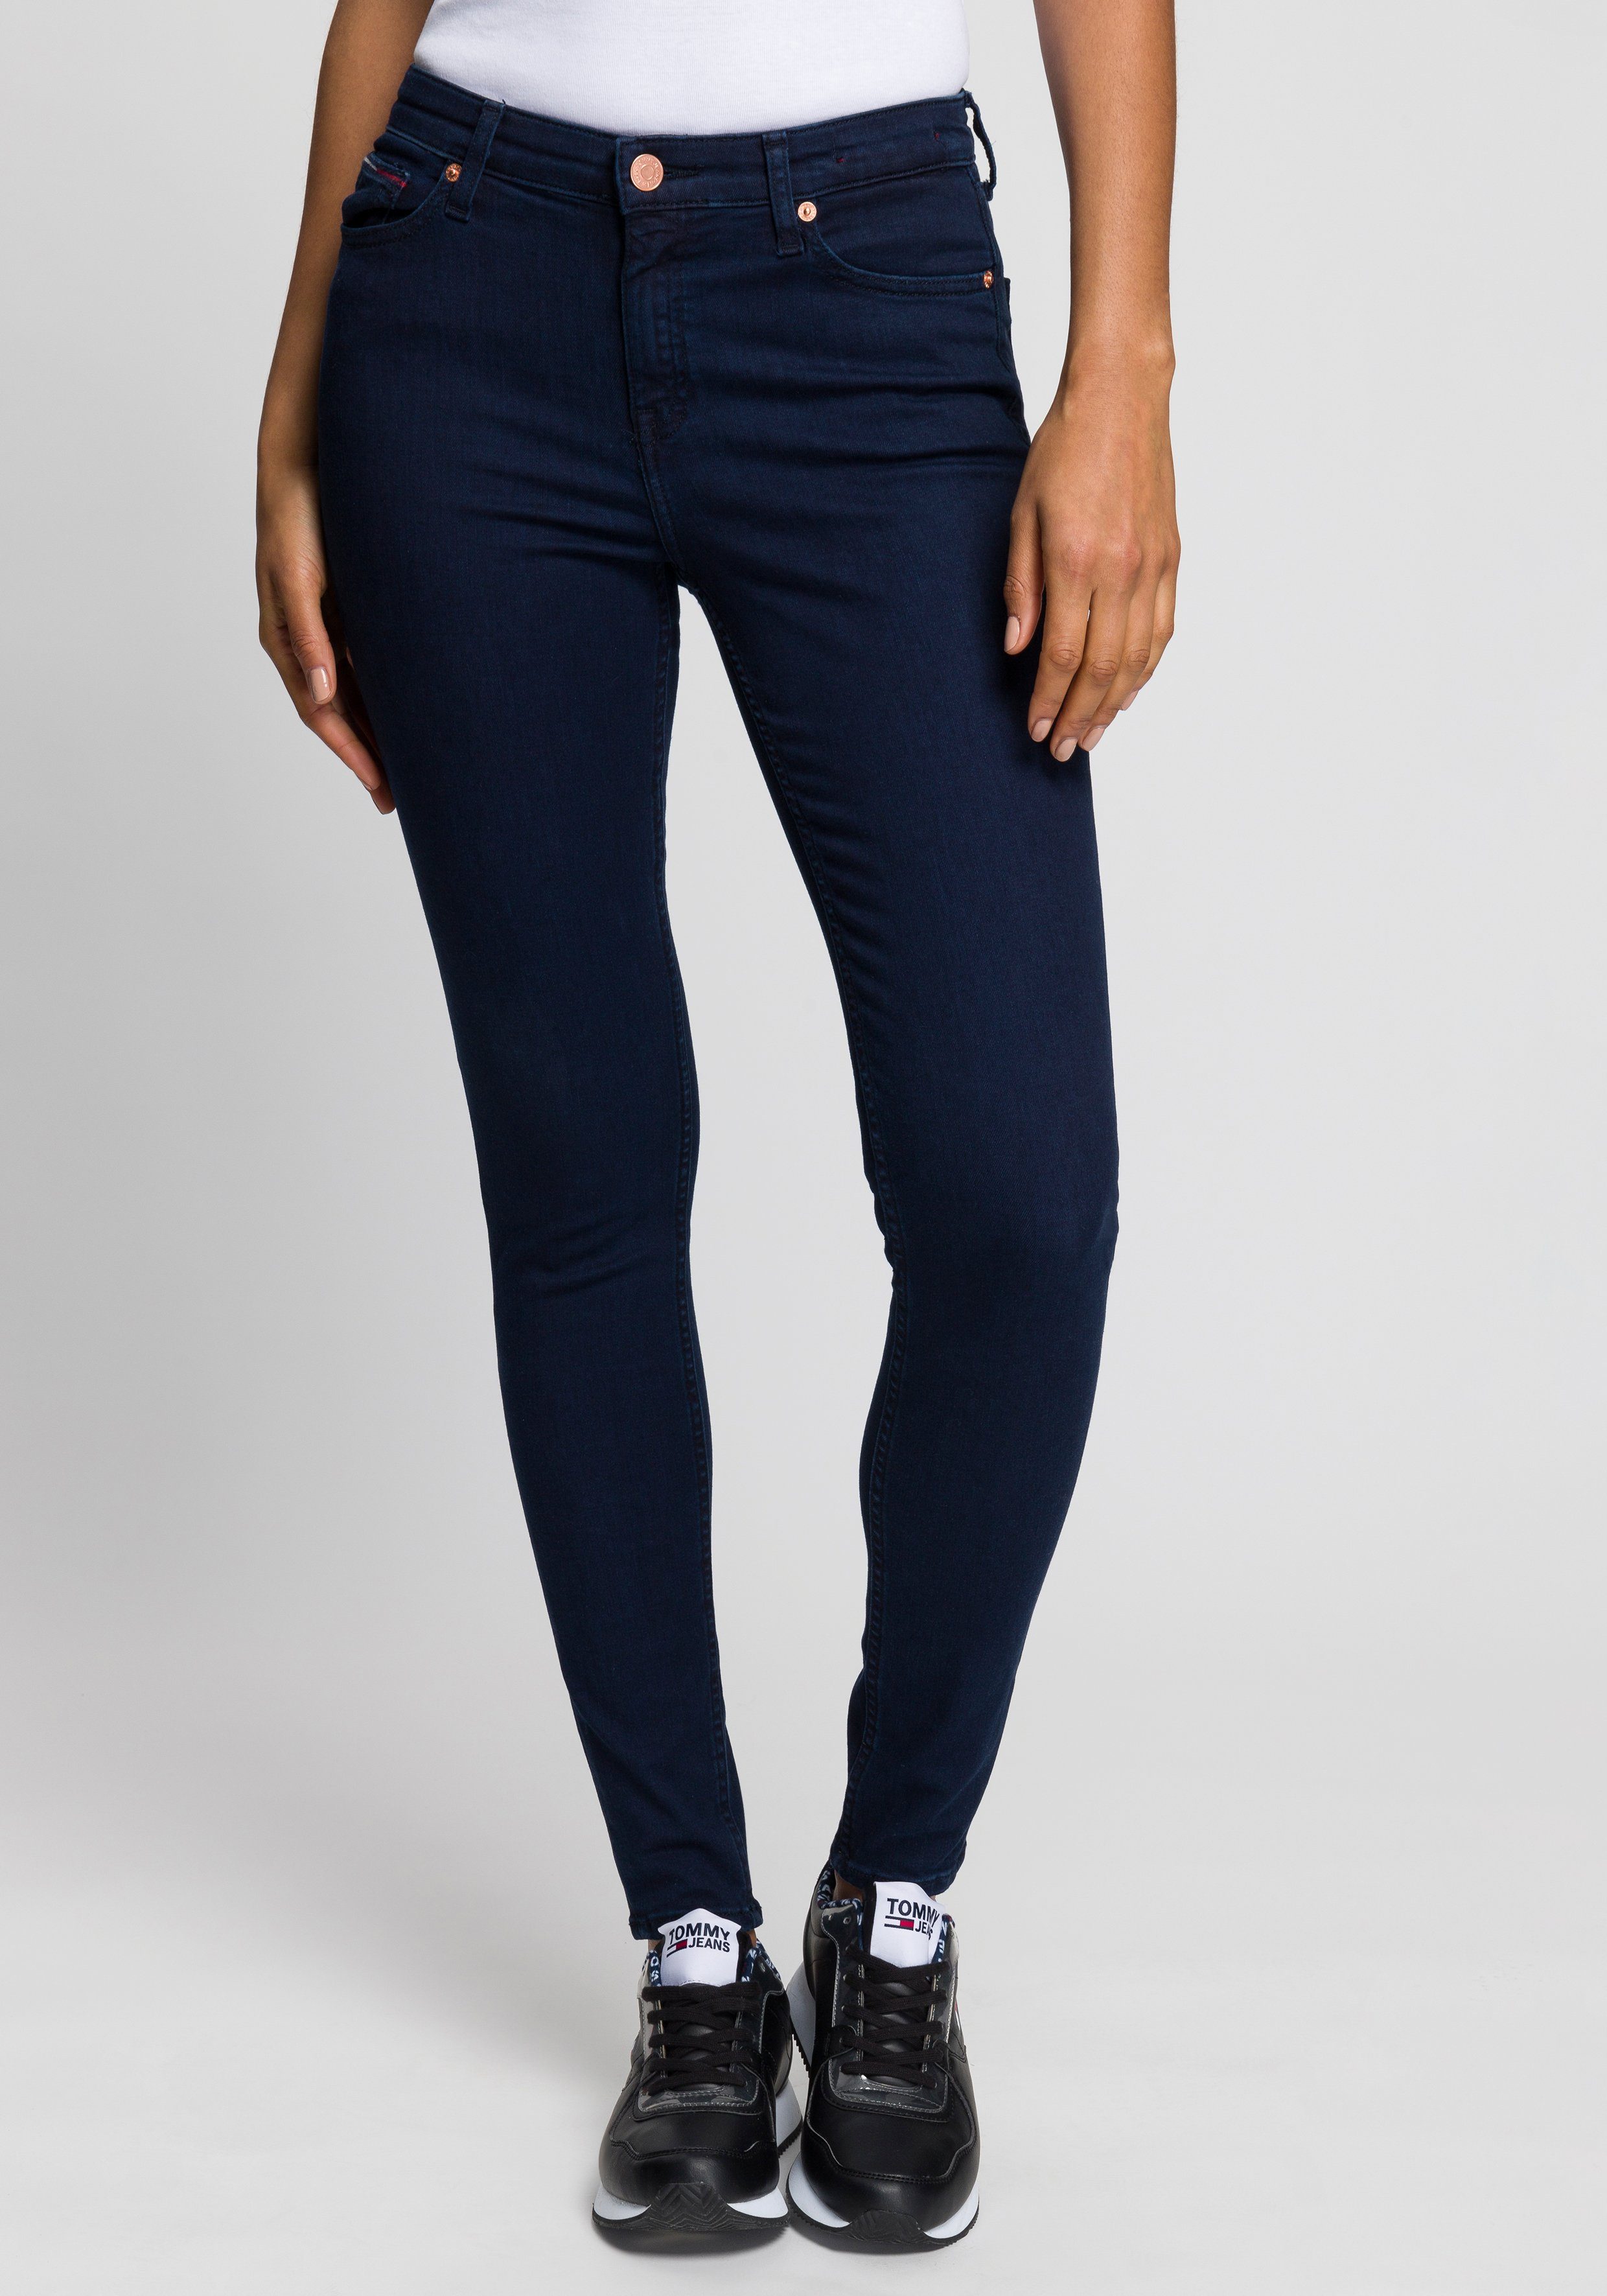 tommy jeans skinny fit jeans nora mr skny met tommy jeans-logobadge  borduursels blauw